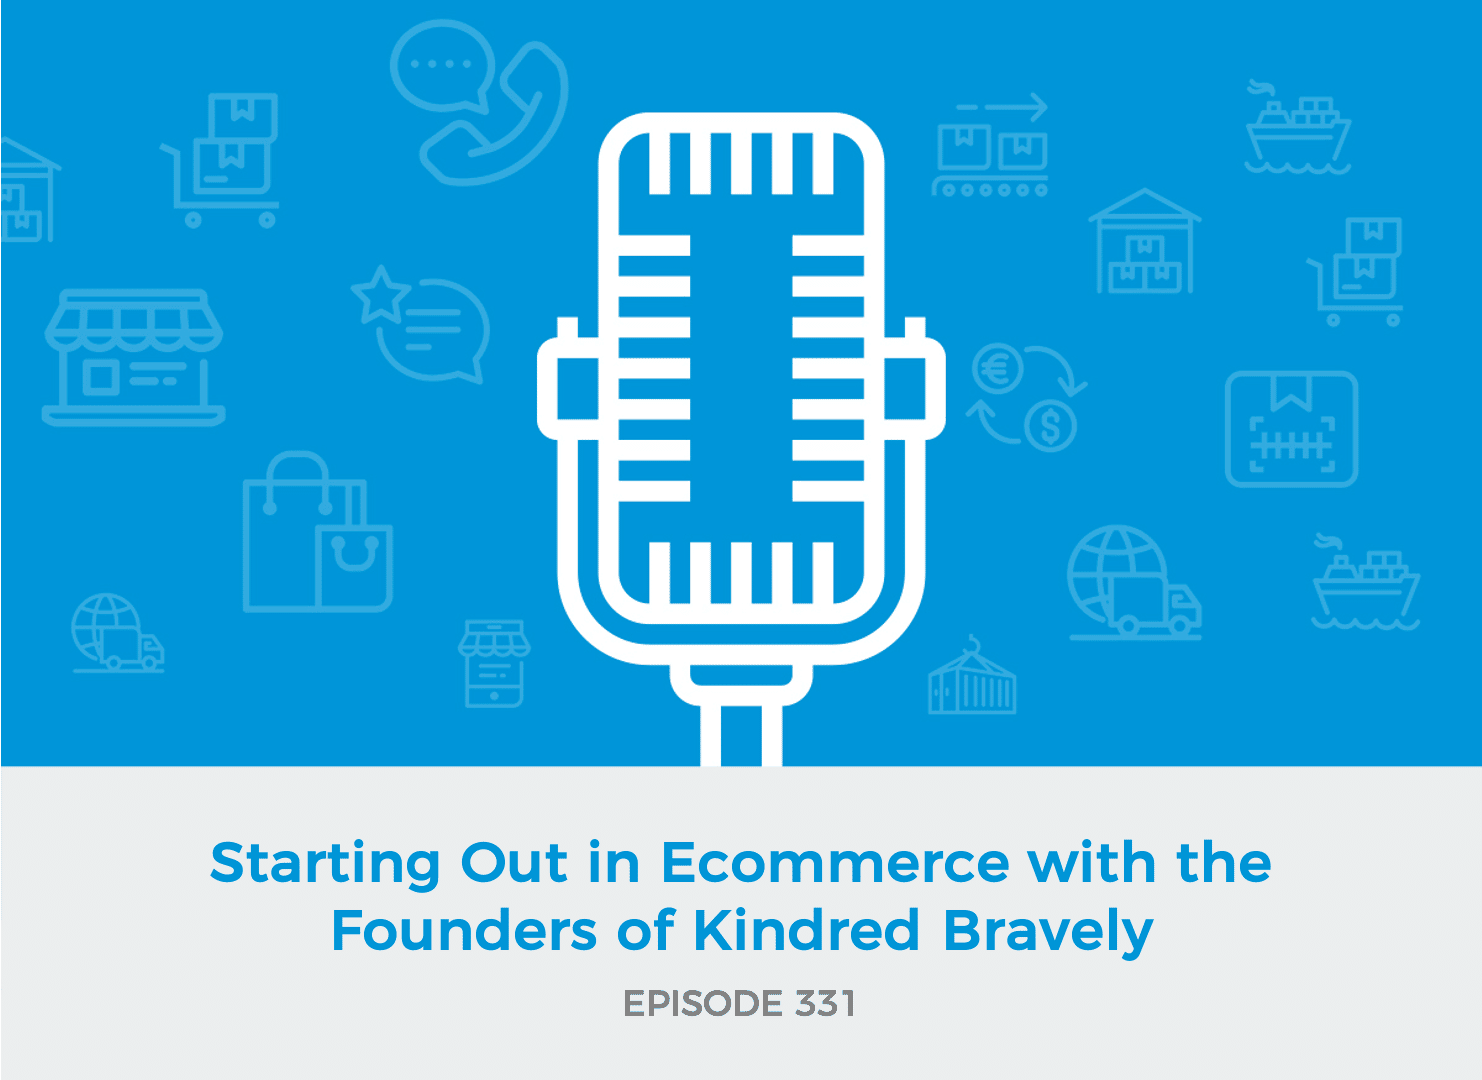 E331: Starting Out in Ecommerce with the Founders of Kindred Bravely